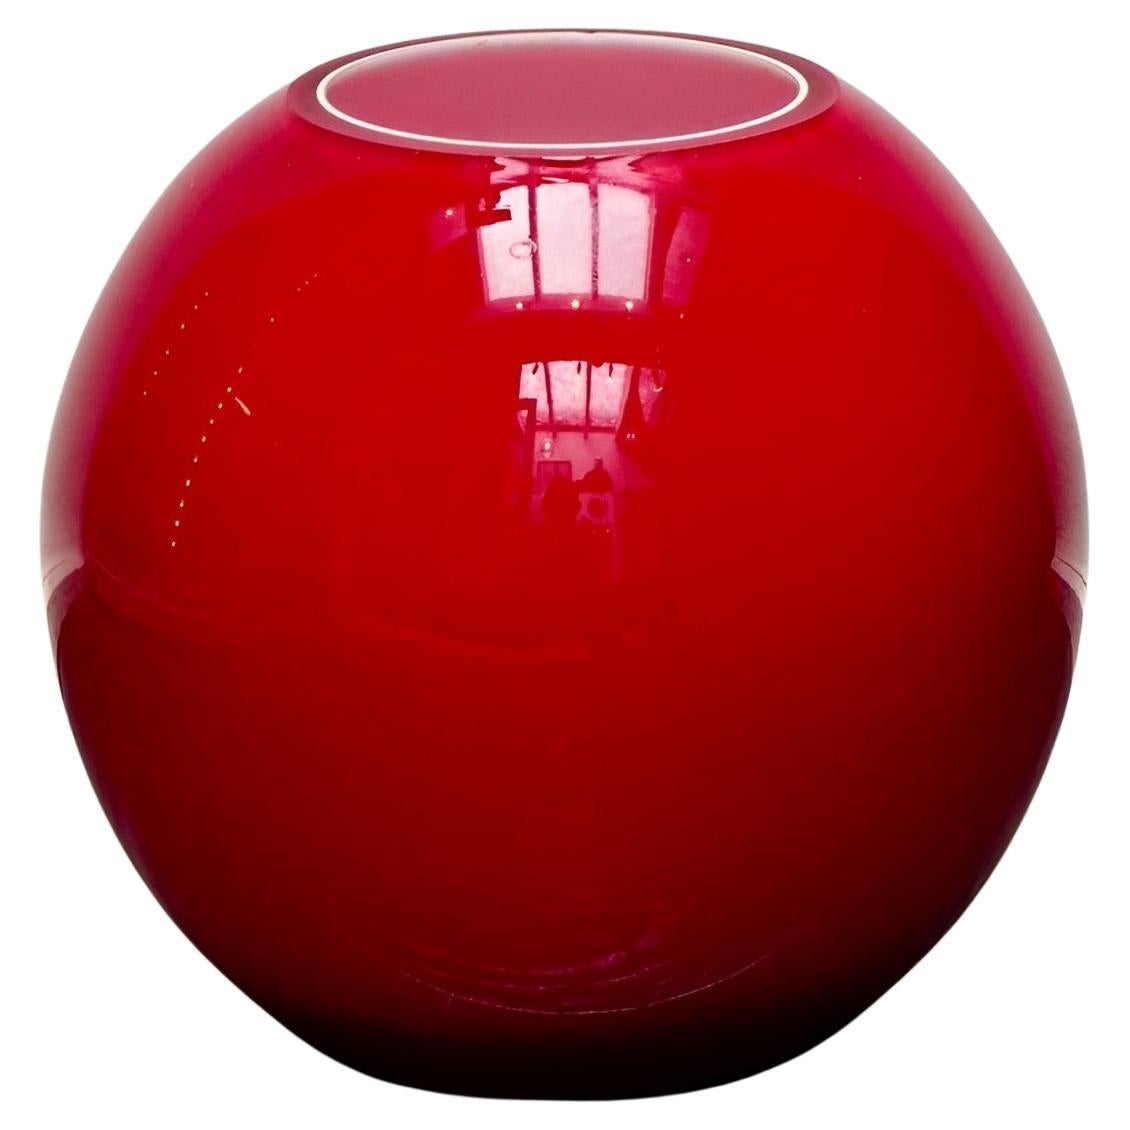 Heavy Round Red Art Glass Ball Vase with White Interior circa 1970s For Sale